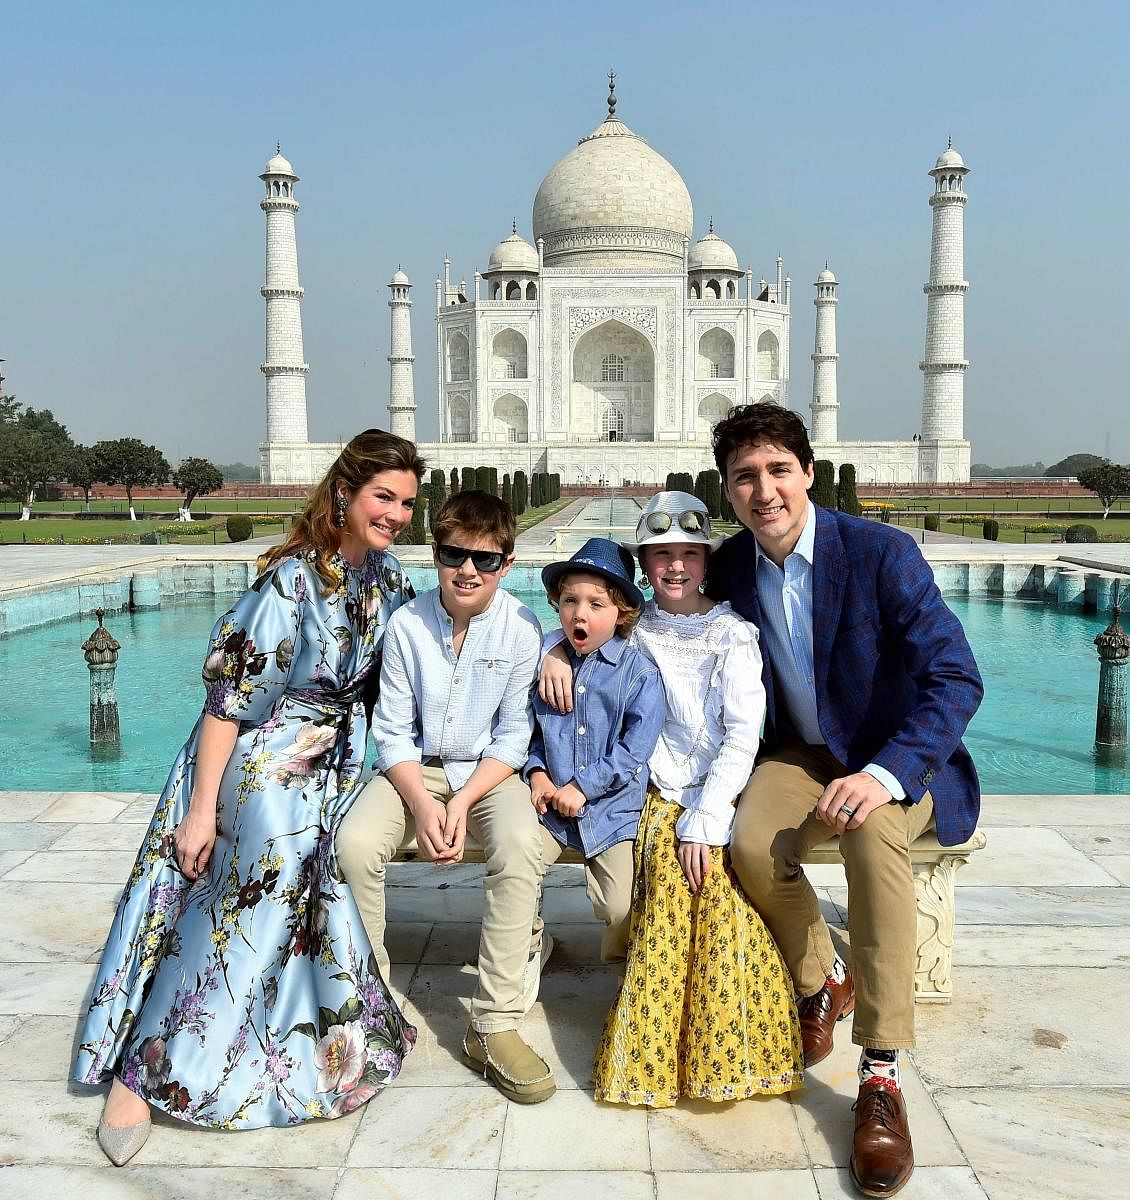 Canadian Prime Minister Justin Trudeau with wife Sophie Gregoire Trudeau and children visit the Taj Mahal in Agra on Sunday. PTI